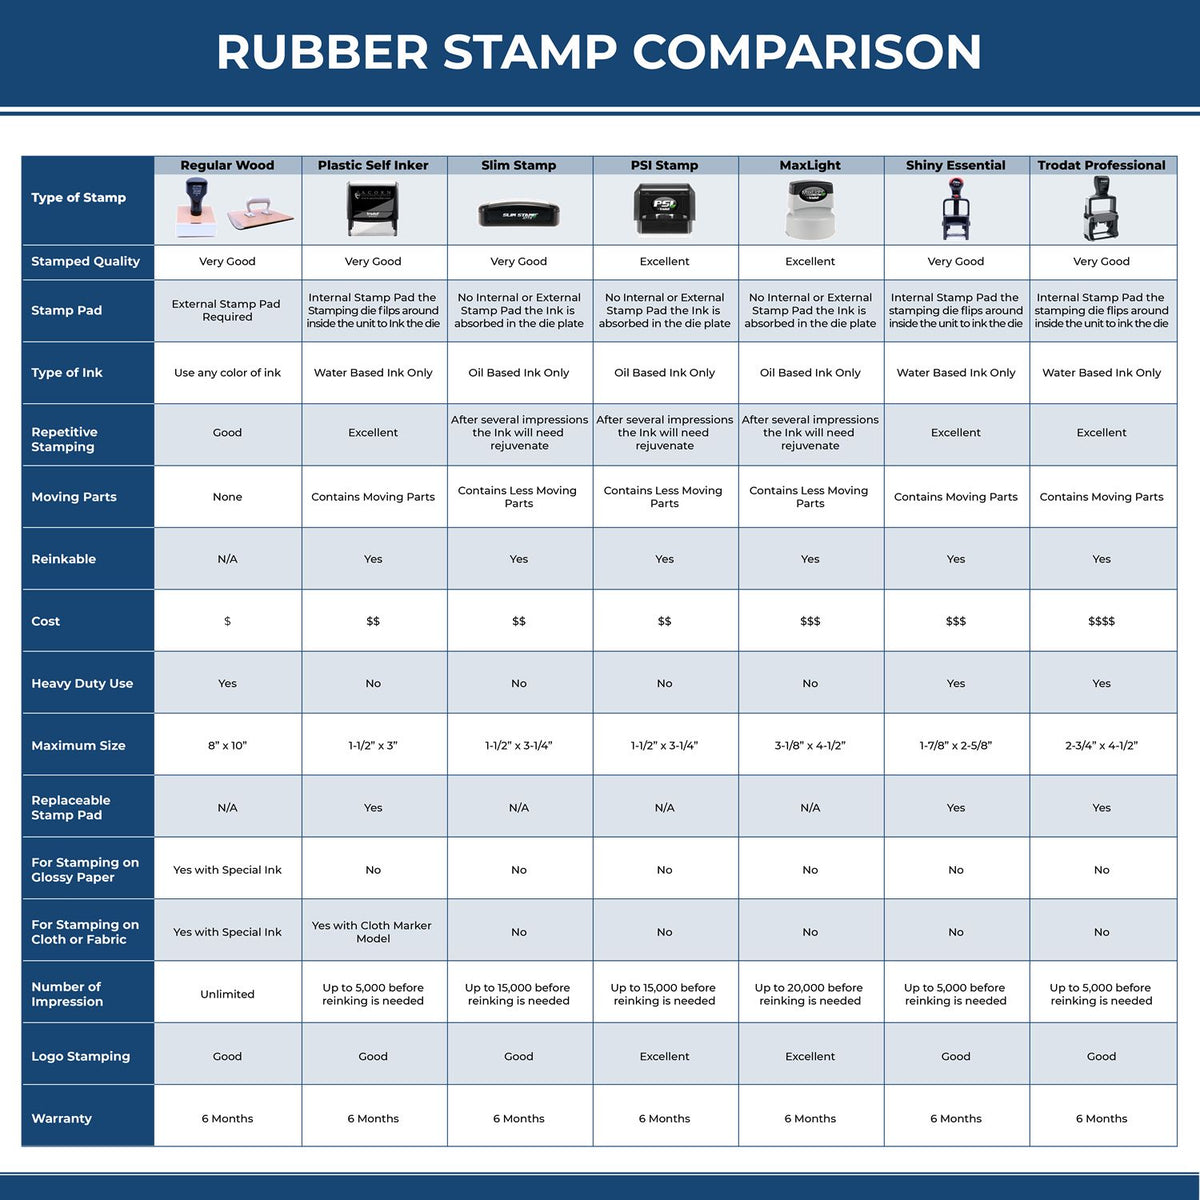 A comparison chart for the different types of mount models available for the Heavy-Duty Alaska Rectangular Notary Stamp.